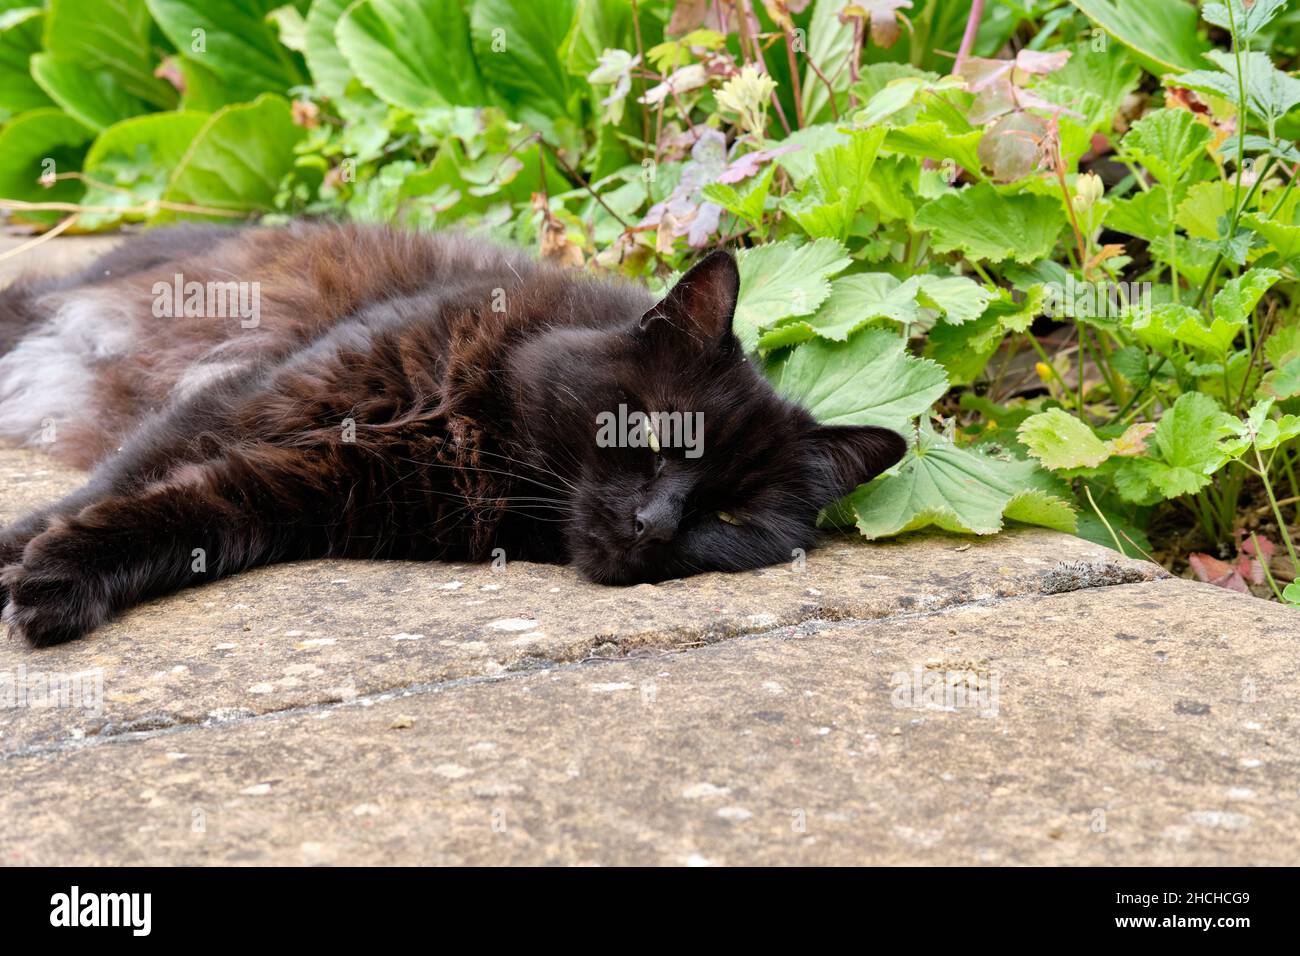 A Black and Brown Domestic Cat, Felis catus, Relaxing on a Wall in a Garden during the Summer. Stock Photo